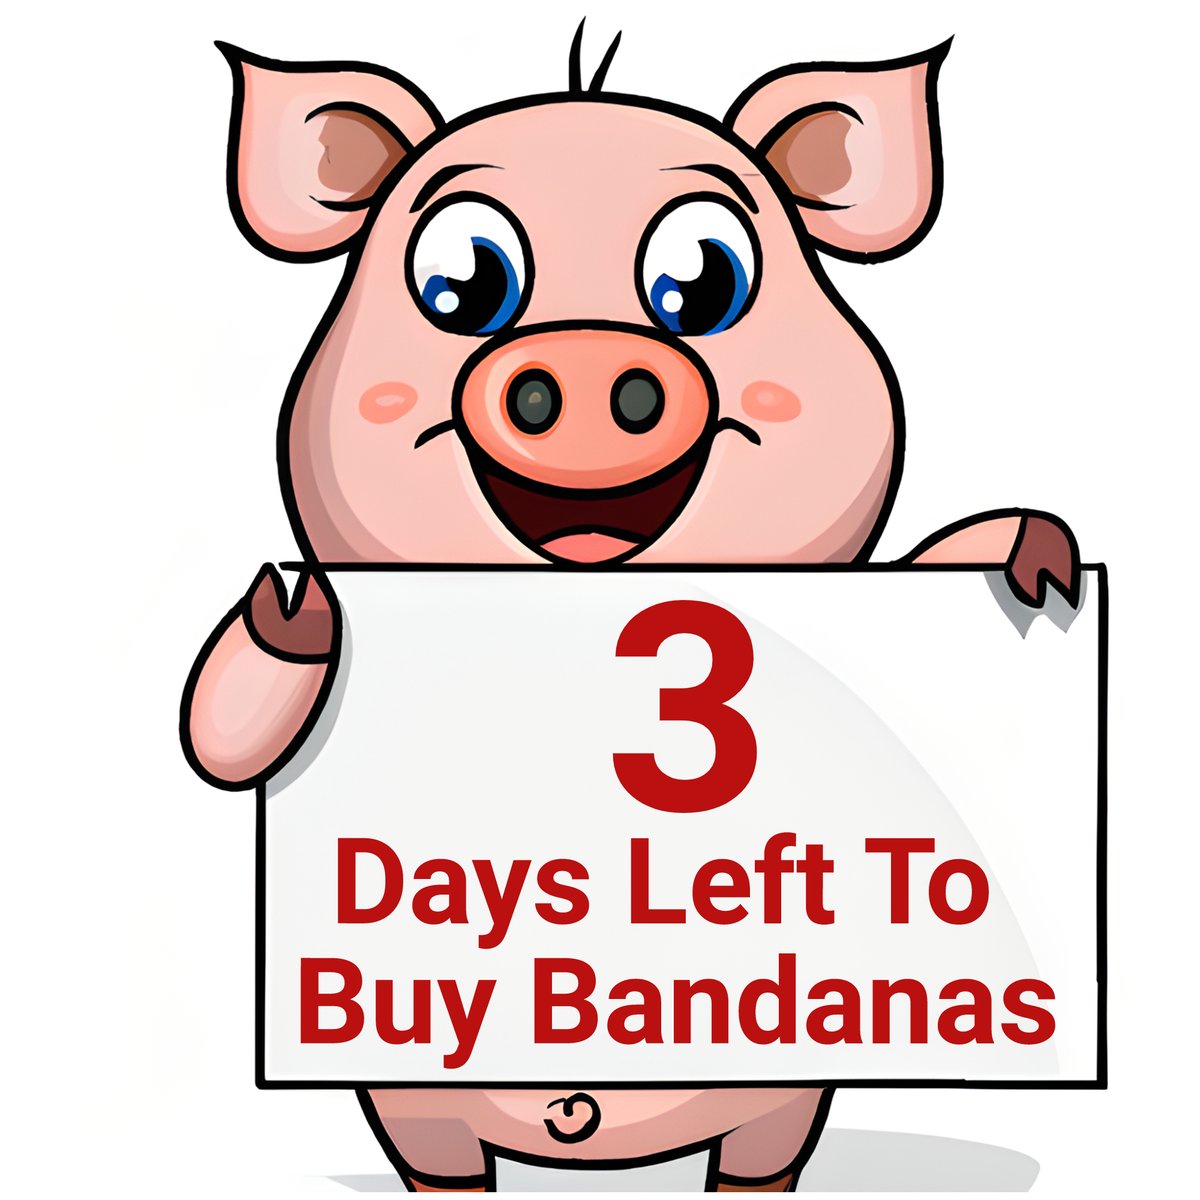 🎉Go HOG Wild!🐷 I DONUT know what else to say... Only 3 More Days to PIG out a new Bandana!😂 Check yoos PIGGY Bank & SQUEAL to da store! ➡️On October 10th, Bandanas will be removed FOREVER. It's SNOUT or never! 🤣 Please help spread da word! RETWEET❤️🐶 #DogsofX #dogsoftwitter